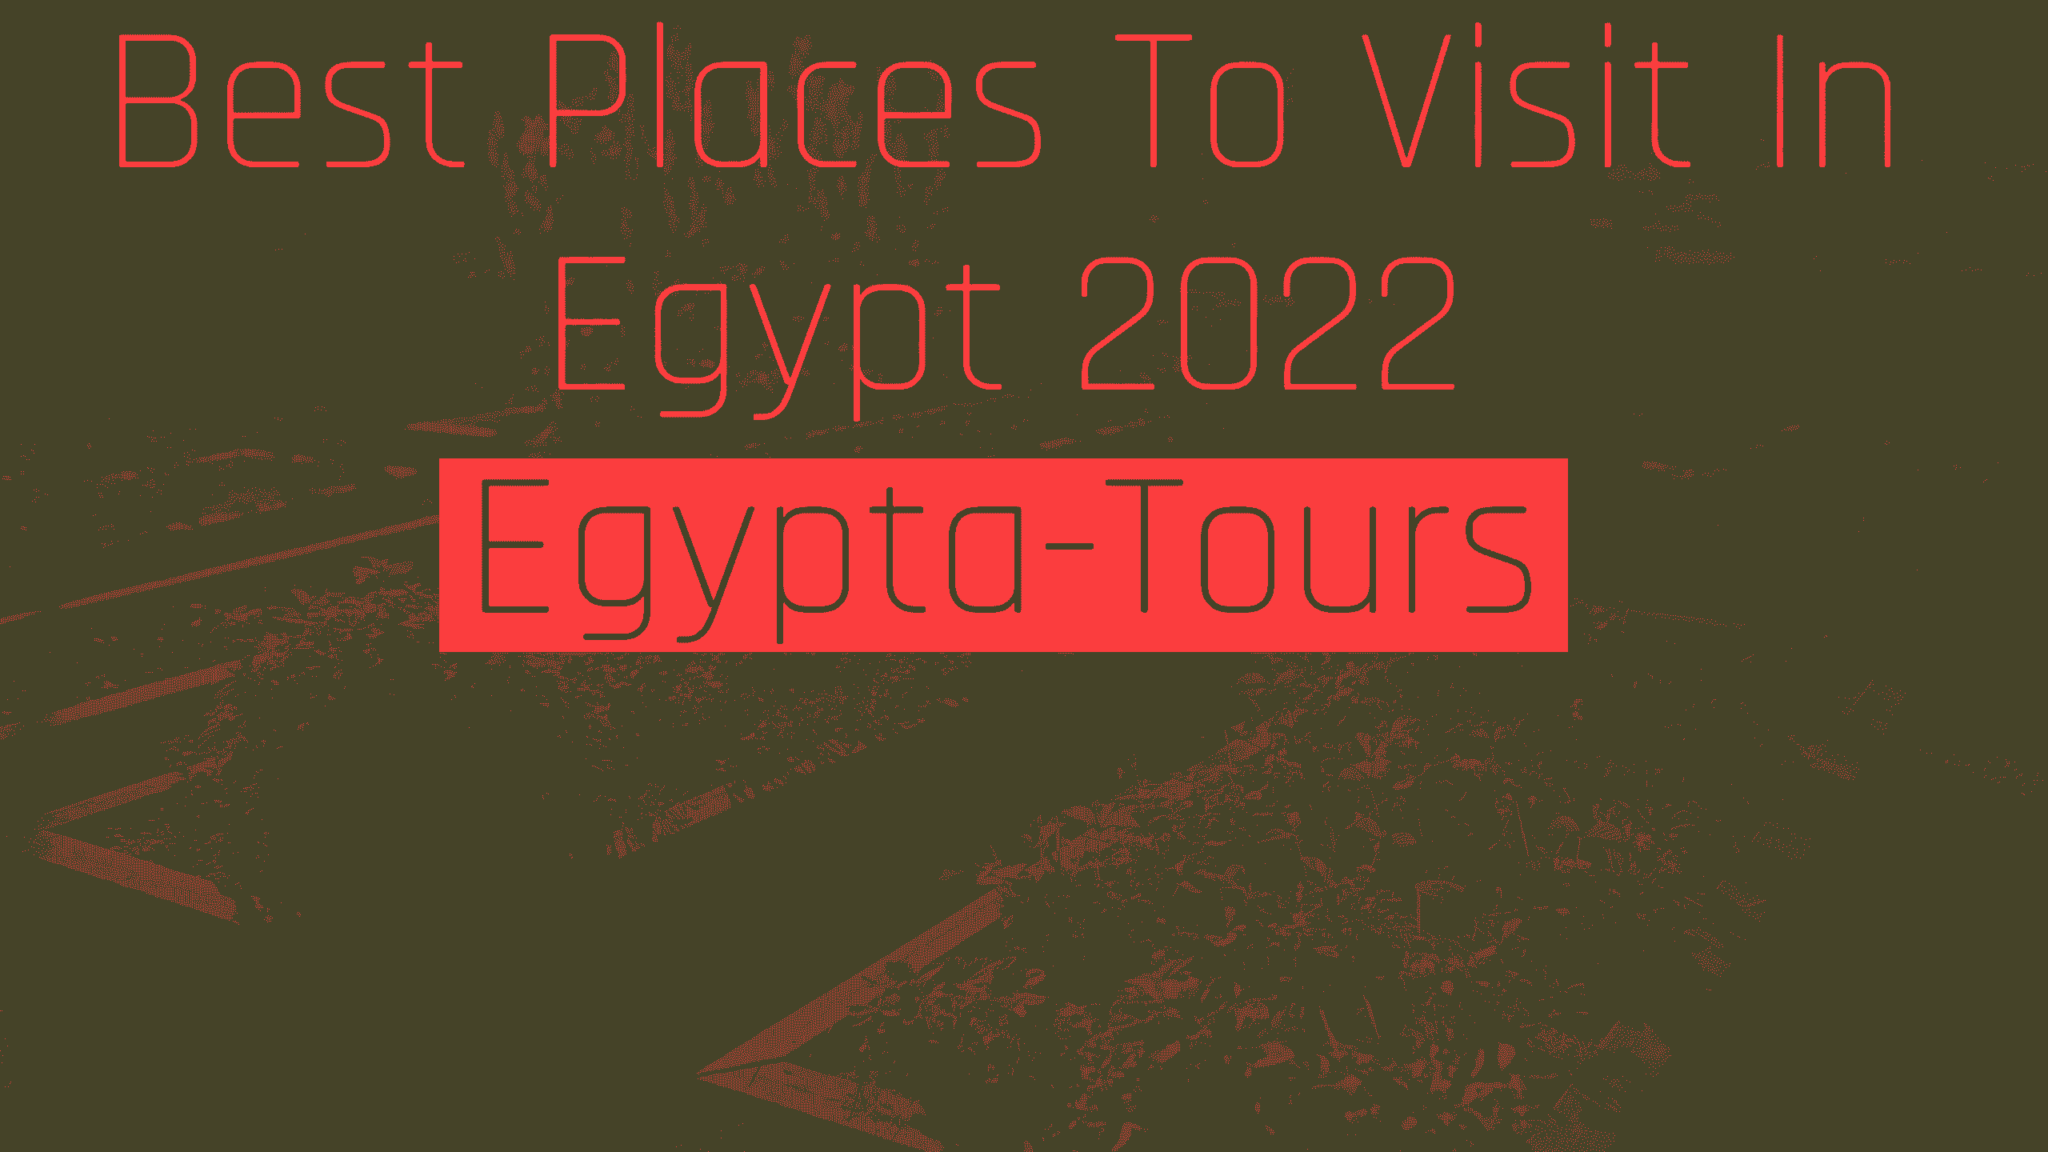 Best Places-to-visit-in-egypt-2022